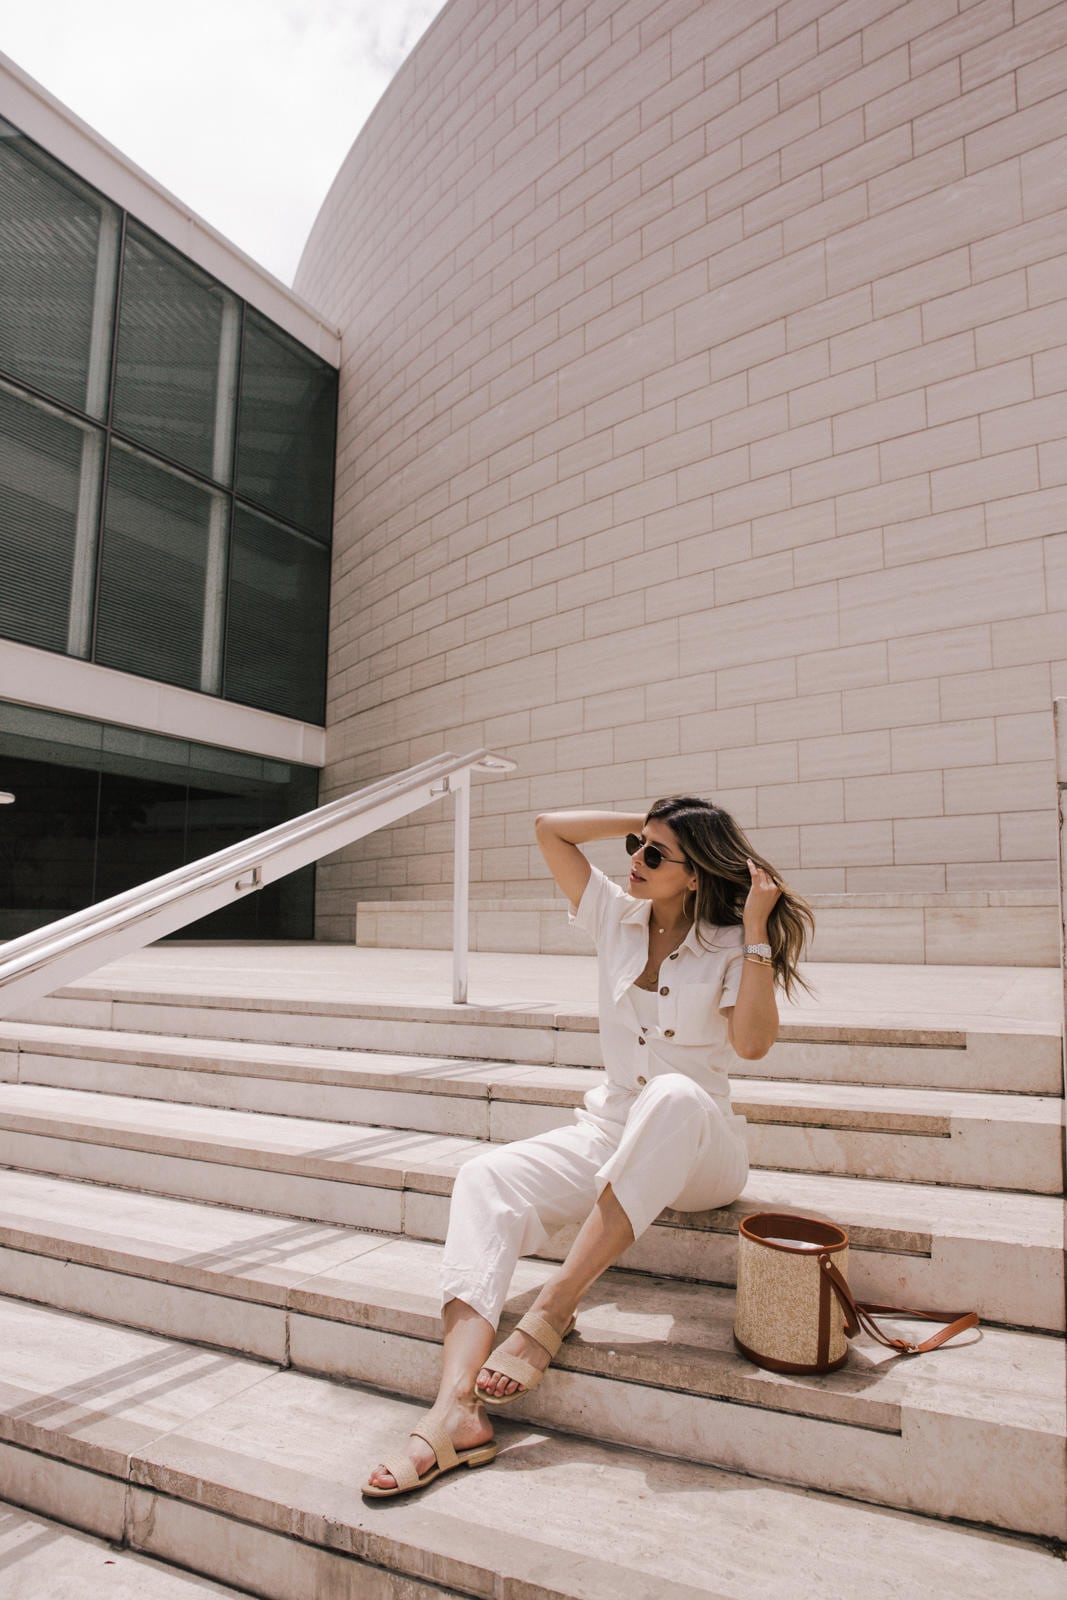 Pam Hetlinger Outfits, Sezane Jumpsuit, Slide Sandals, Straw Bag, July 4 Outfit | TheGirlFromPanama.com | 5 July 4 Outfits You'll Want to Wear All Summer Long by Pam Hetlinger